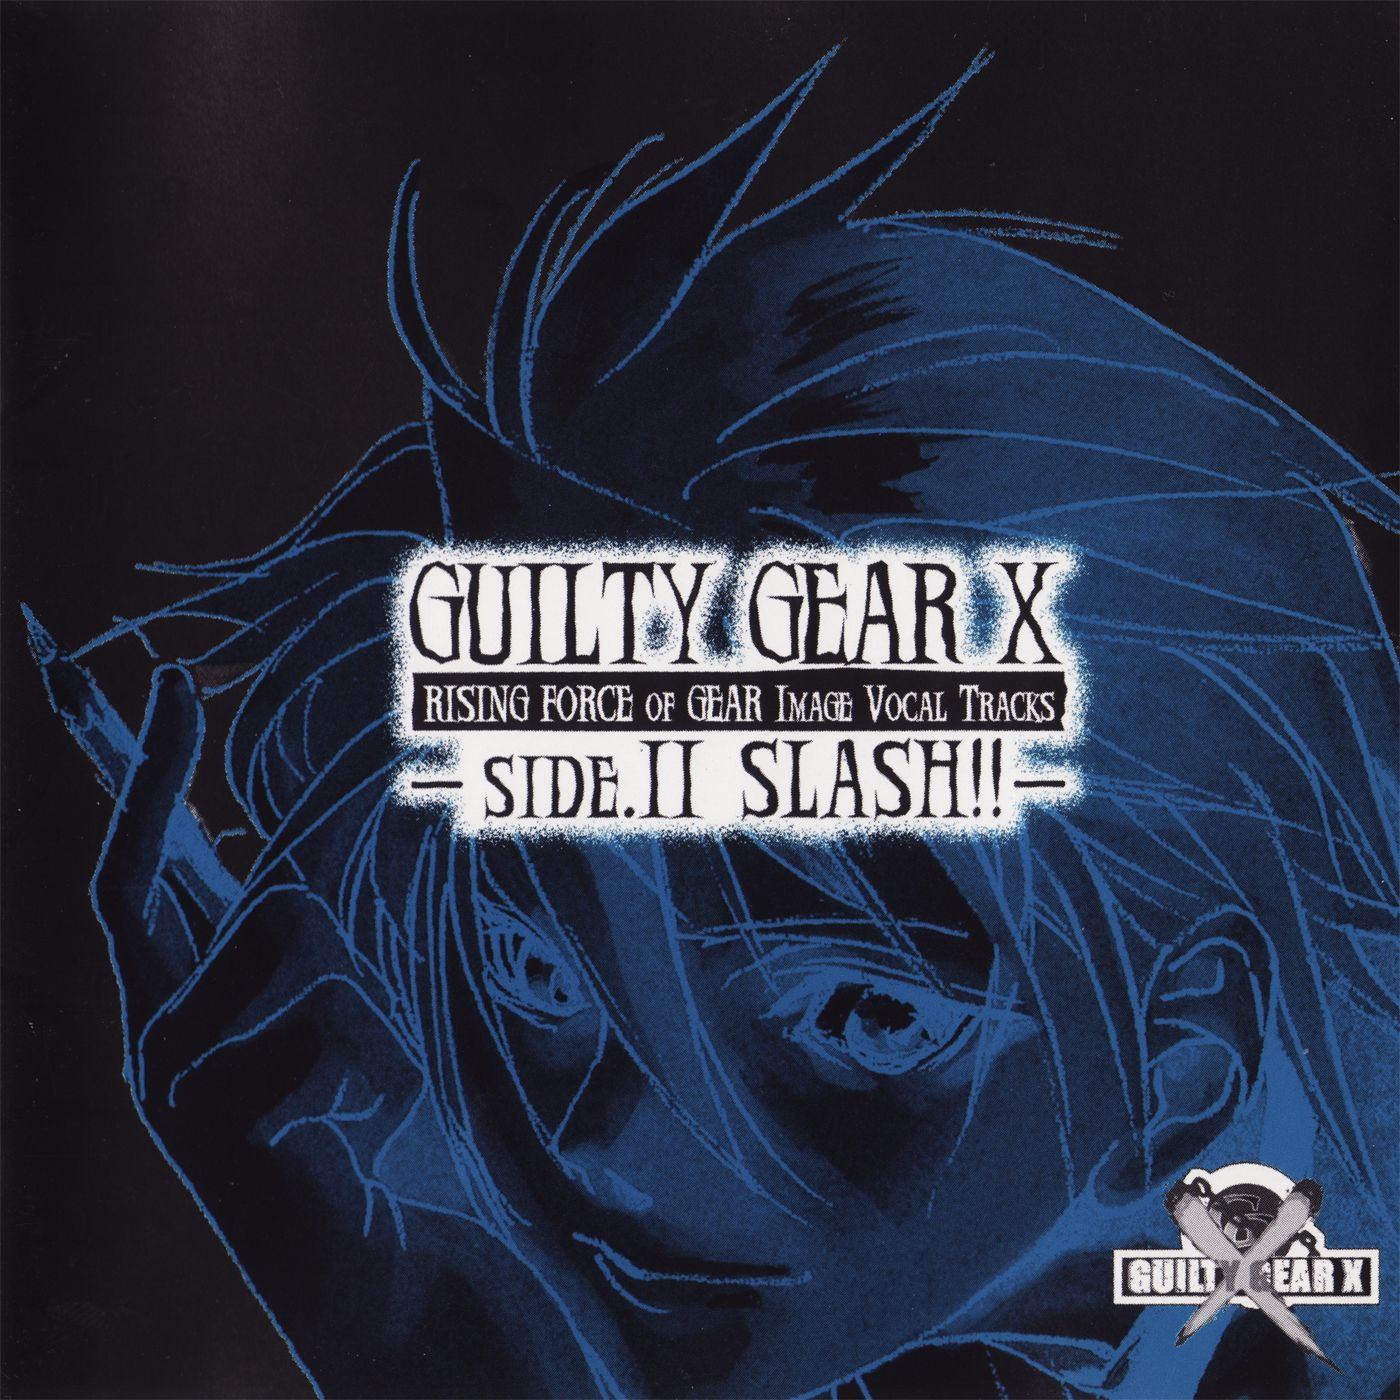 GUILTY GEAR X RISING FORCE OF GEAR IMAGE VOCAL TRACKS -SIDE.2 SLASH!!-